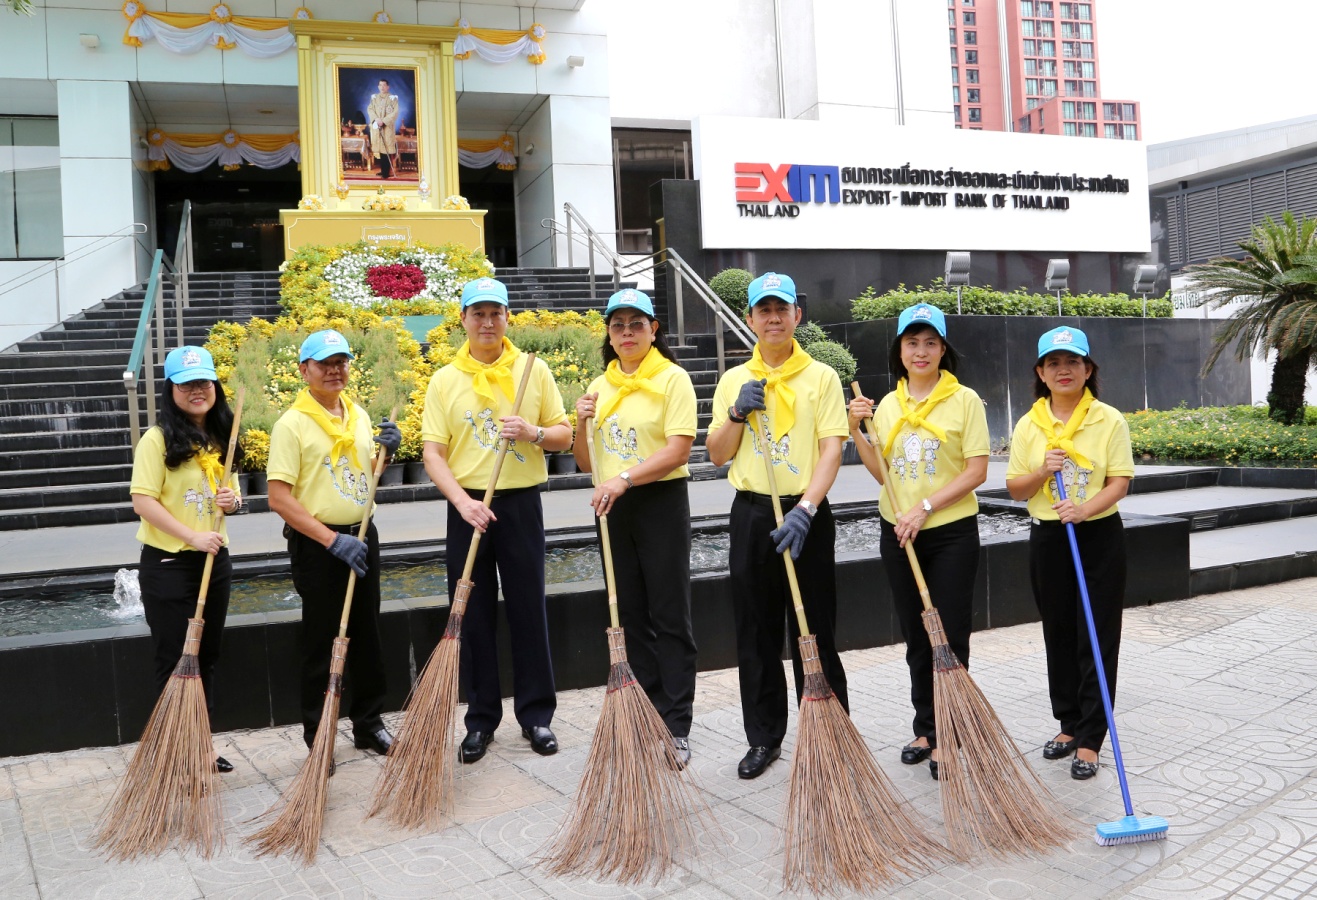 EXIM Thailand Co-organizes Big Cleaning Day Volunteering Activity In Commemoration of His Majesty King Maha Vajiralongkorn’s 66th Birthday Anniversary on July 28, 2018